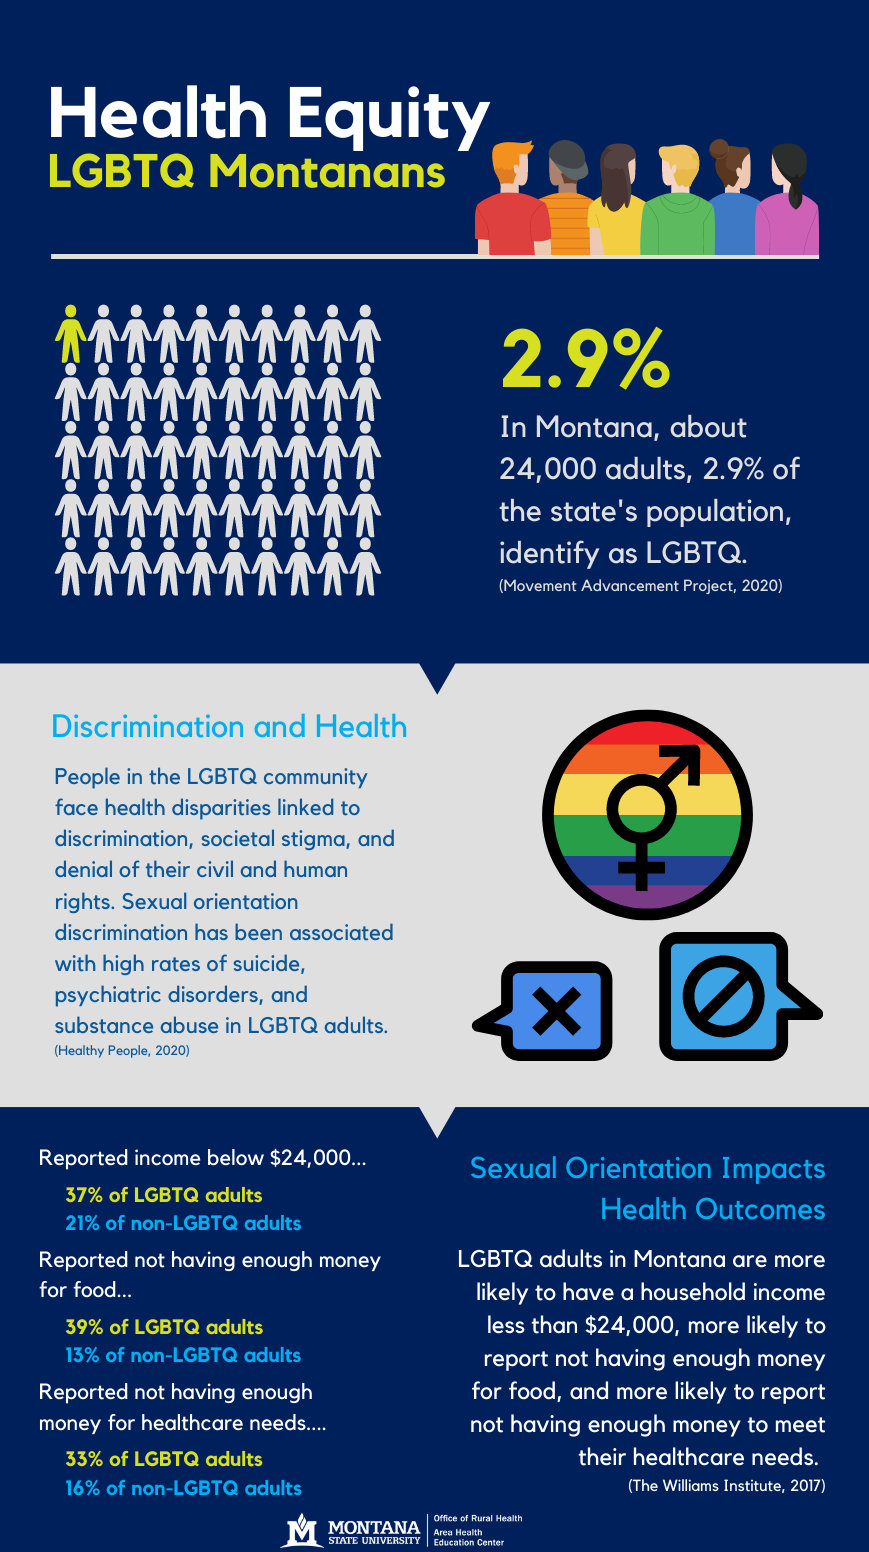 Health Equity - LGBTQ Montanans. In Montana, about 24,000 adults, 2.9% of the state's population, identify as LGBTQ. (Movement Advancement Project, 2020). Discrimination and Health. People in the LGBTQ community face health disparities linked to discrimination, societal stigma, and denial of their civil and human rights. Sexual orientation discrimination has been associated with high rates of suicide, psychiatric disorders, and substance abuse in LGBTQ adults. (Healthy People, 2020). Sexual Orientation Impacts Health Outcomes. LGBTQ adults in Montana are more likely to have a household income less than $24,000, more likely to report not having enough money for food, and more likely to report not having enough money to meet their healthcare needs.  (The Williams Institute, 2017). Reported income below $24,000... 37% of LGBTQ adults, 21% of non-LGBTQ adults. Reported not having enough money for food... 39% of LGBTQ adults, 13% of non-LGBTQ adults. Reported not having enough money for healthcare needs... 33% of LGBTQ adults, 16% of non-LGBTQ adults. 